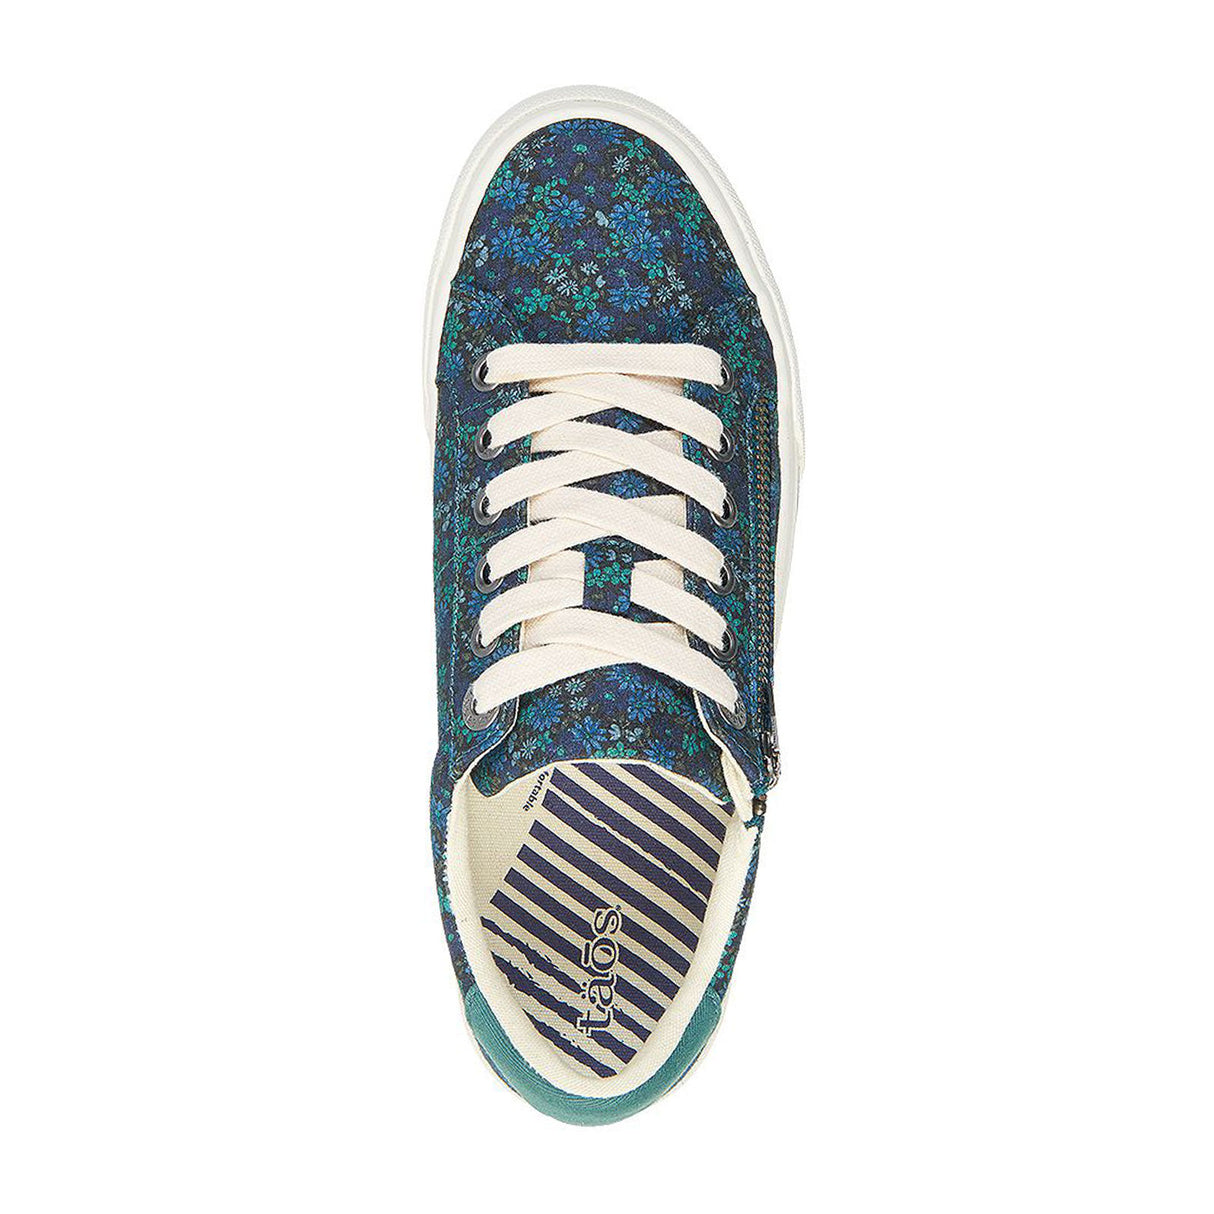 Taos Z Soul Sneaker (Women) - Teal Floral Multi Athletic - Casual - Lace Up - The Heel Shoe Fitters